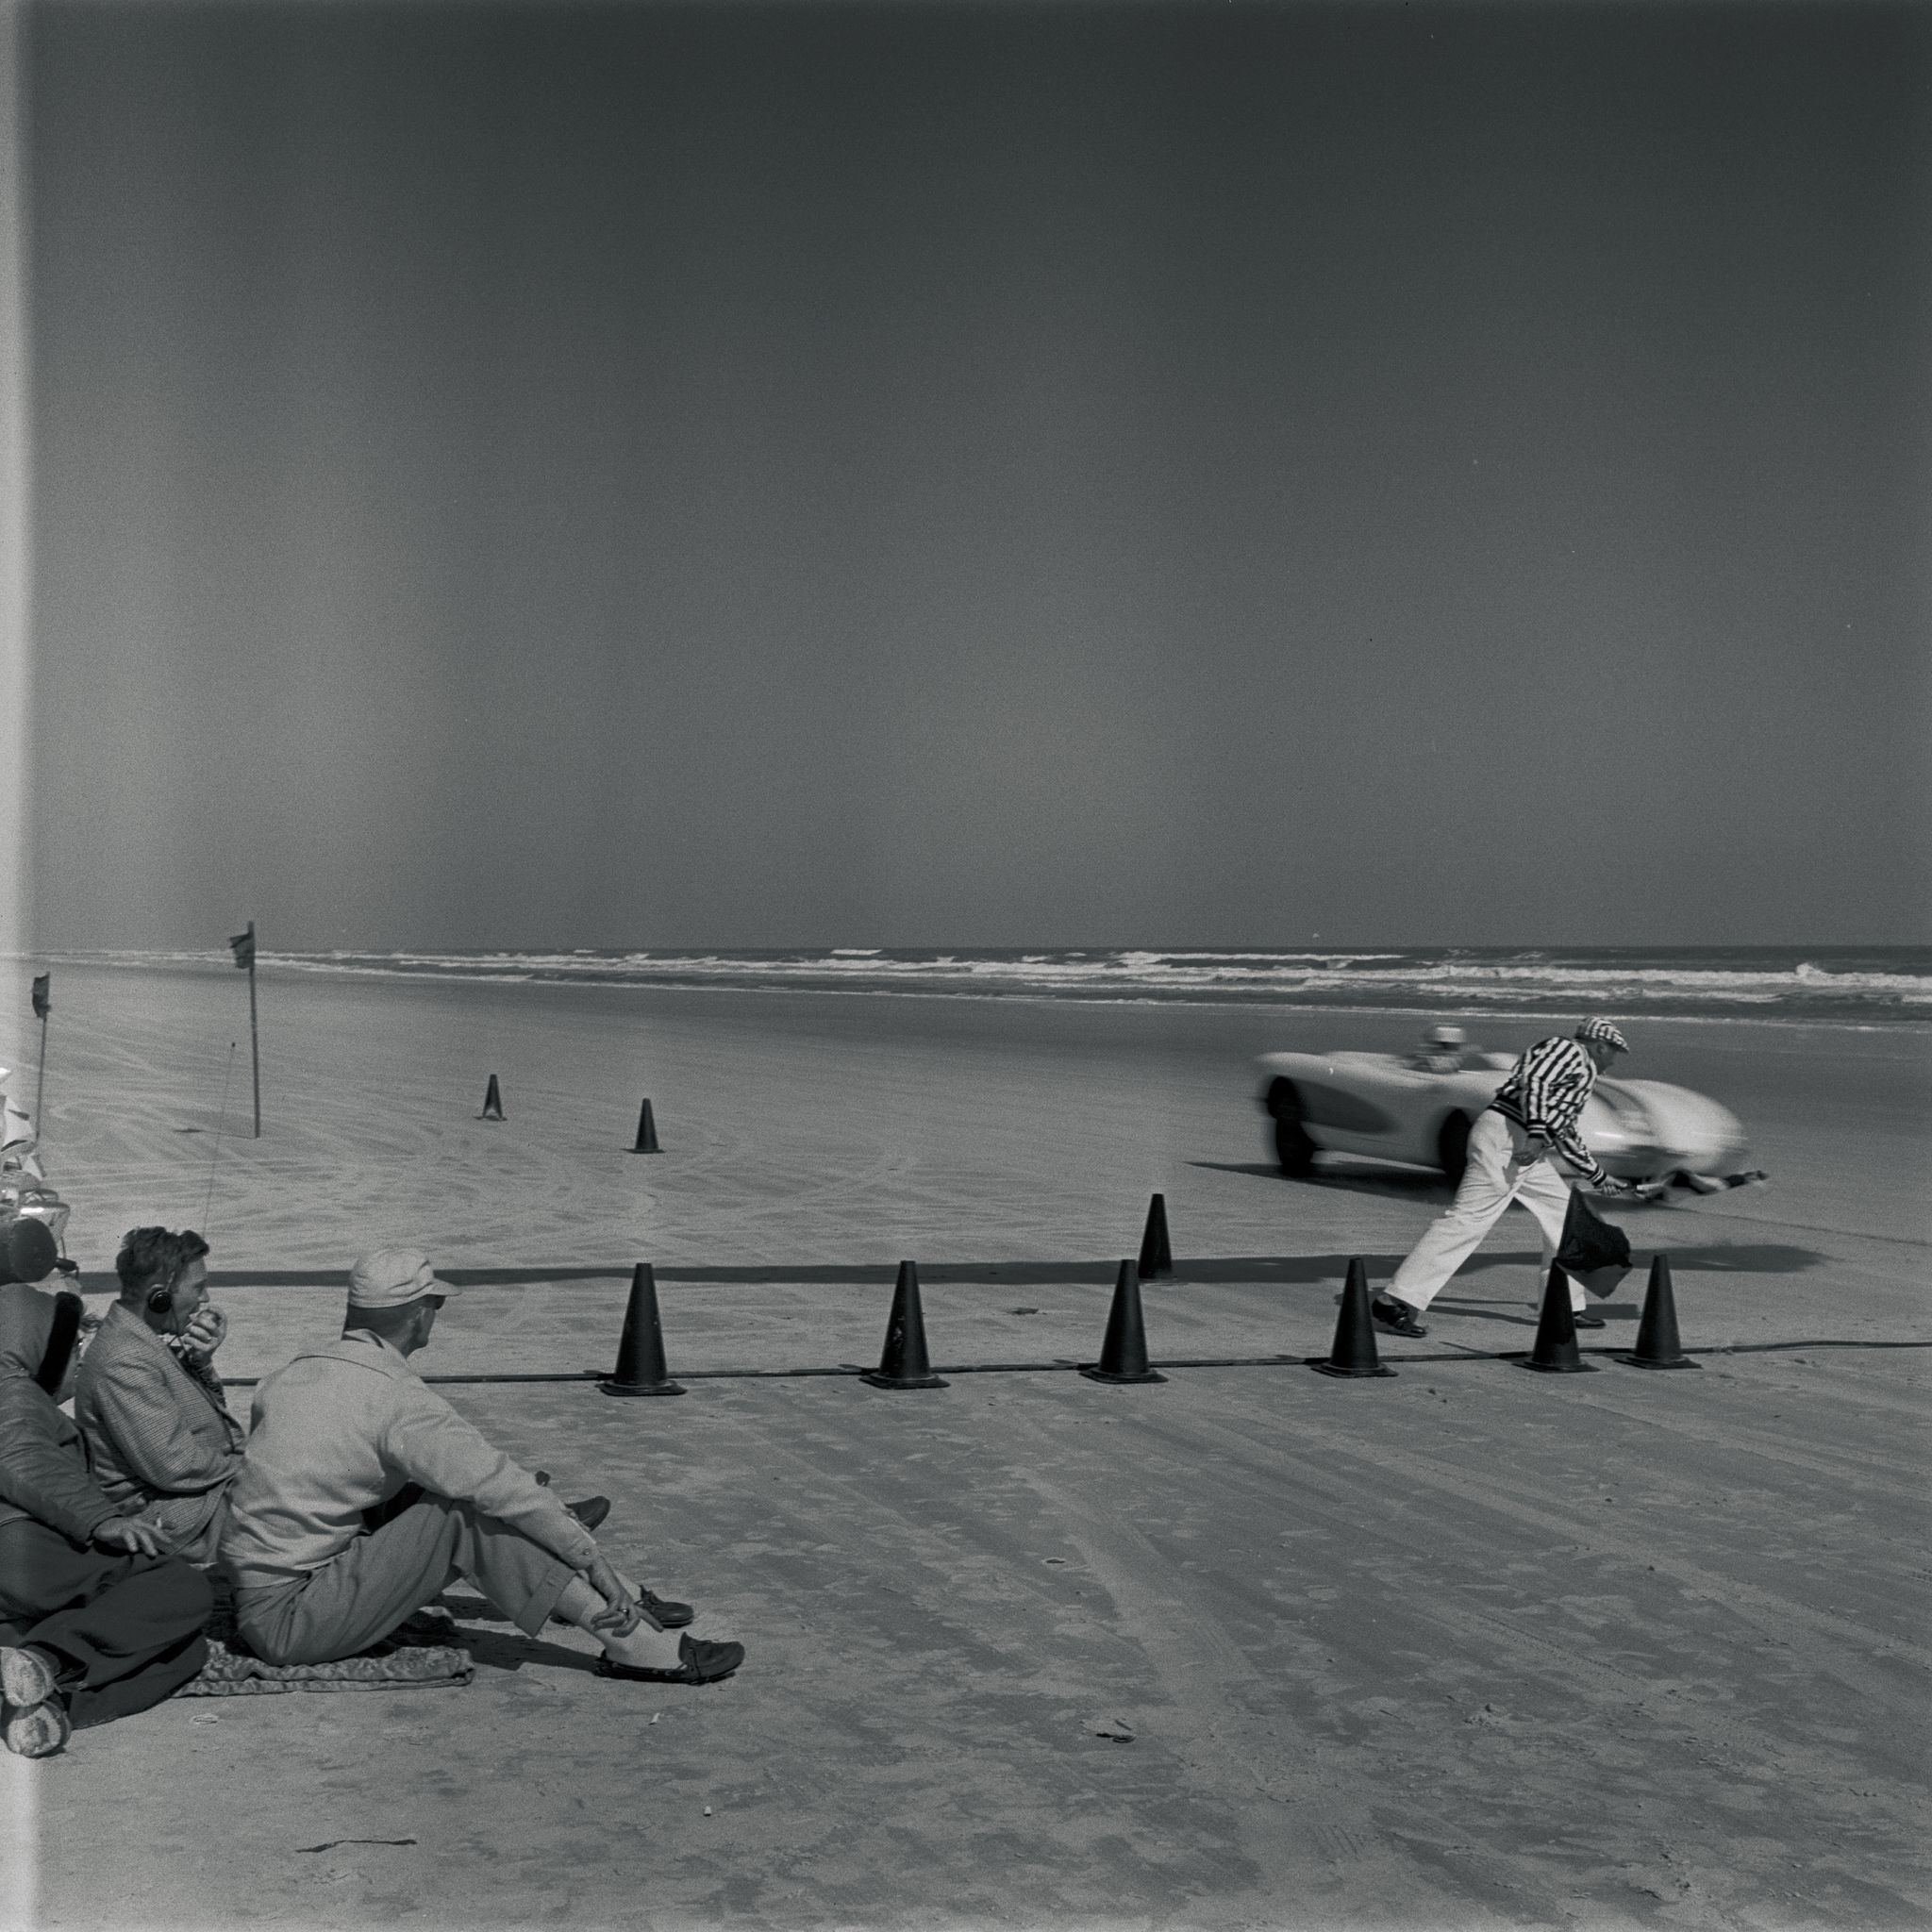 united states february 29 daytona beach speed week 1956 one of the trio of chevrolet factory prepared 1956 corvettes and driven by betty skelton, john fitch, and chevrolet engineer zora arkus duntov this one crosses the timing line on its southbound run as the flagman drops the checkers photo by ray brockthe enthusiast network via getty imagesgetty images